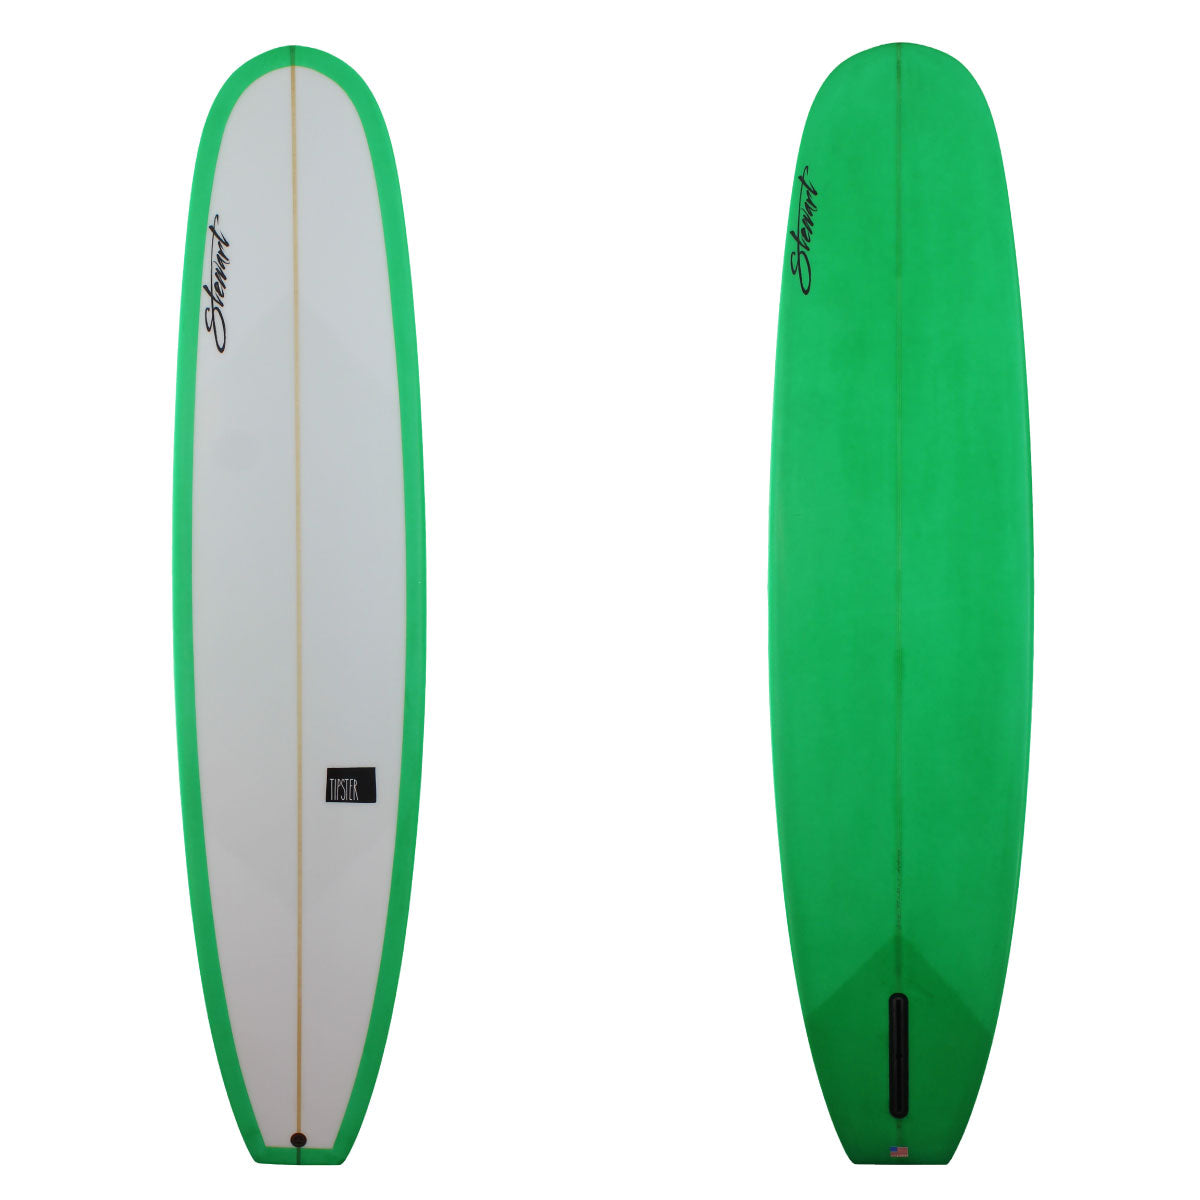 Stewart Surfboards 9'0 TIPSTER with green resin tint bottom and rails, clear white deck